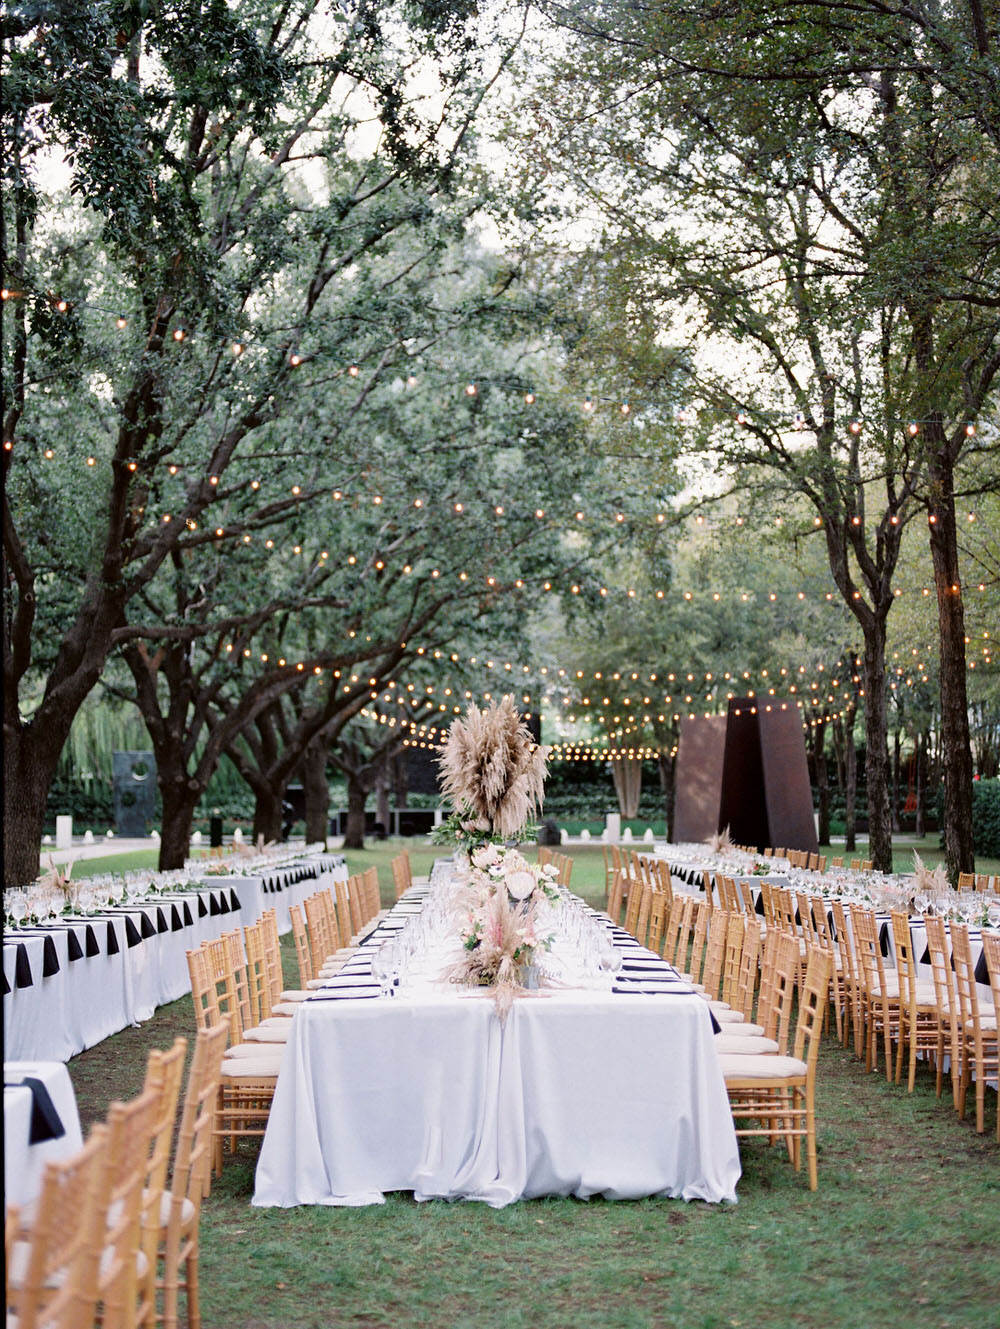 Here's What Happens When You Break Traditions and Have an Ultra Chic Wedding  ⋆ Ruffled